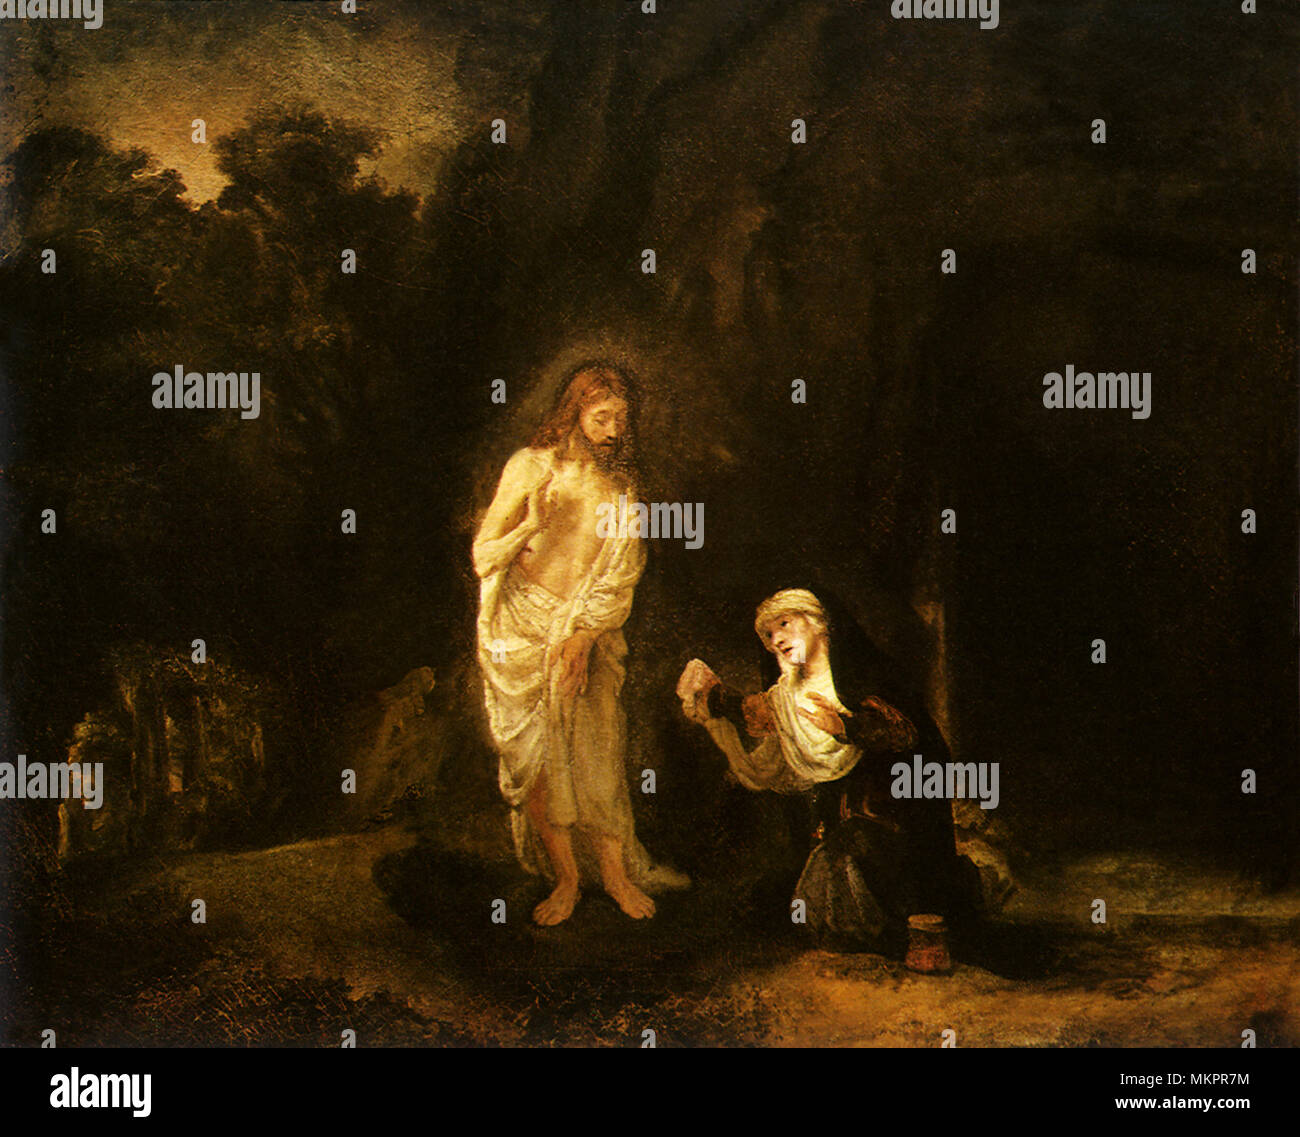 The Resurrected Lord Appears to Mary Magdalene Stock Photo